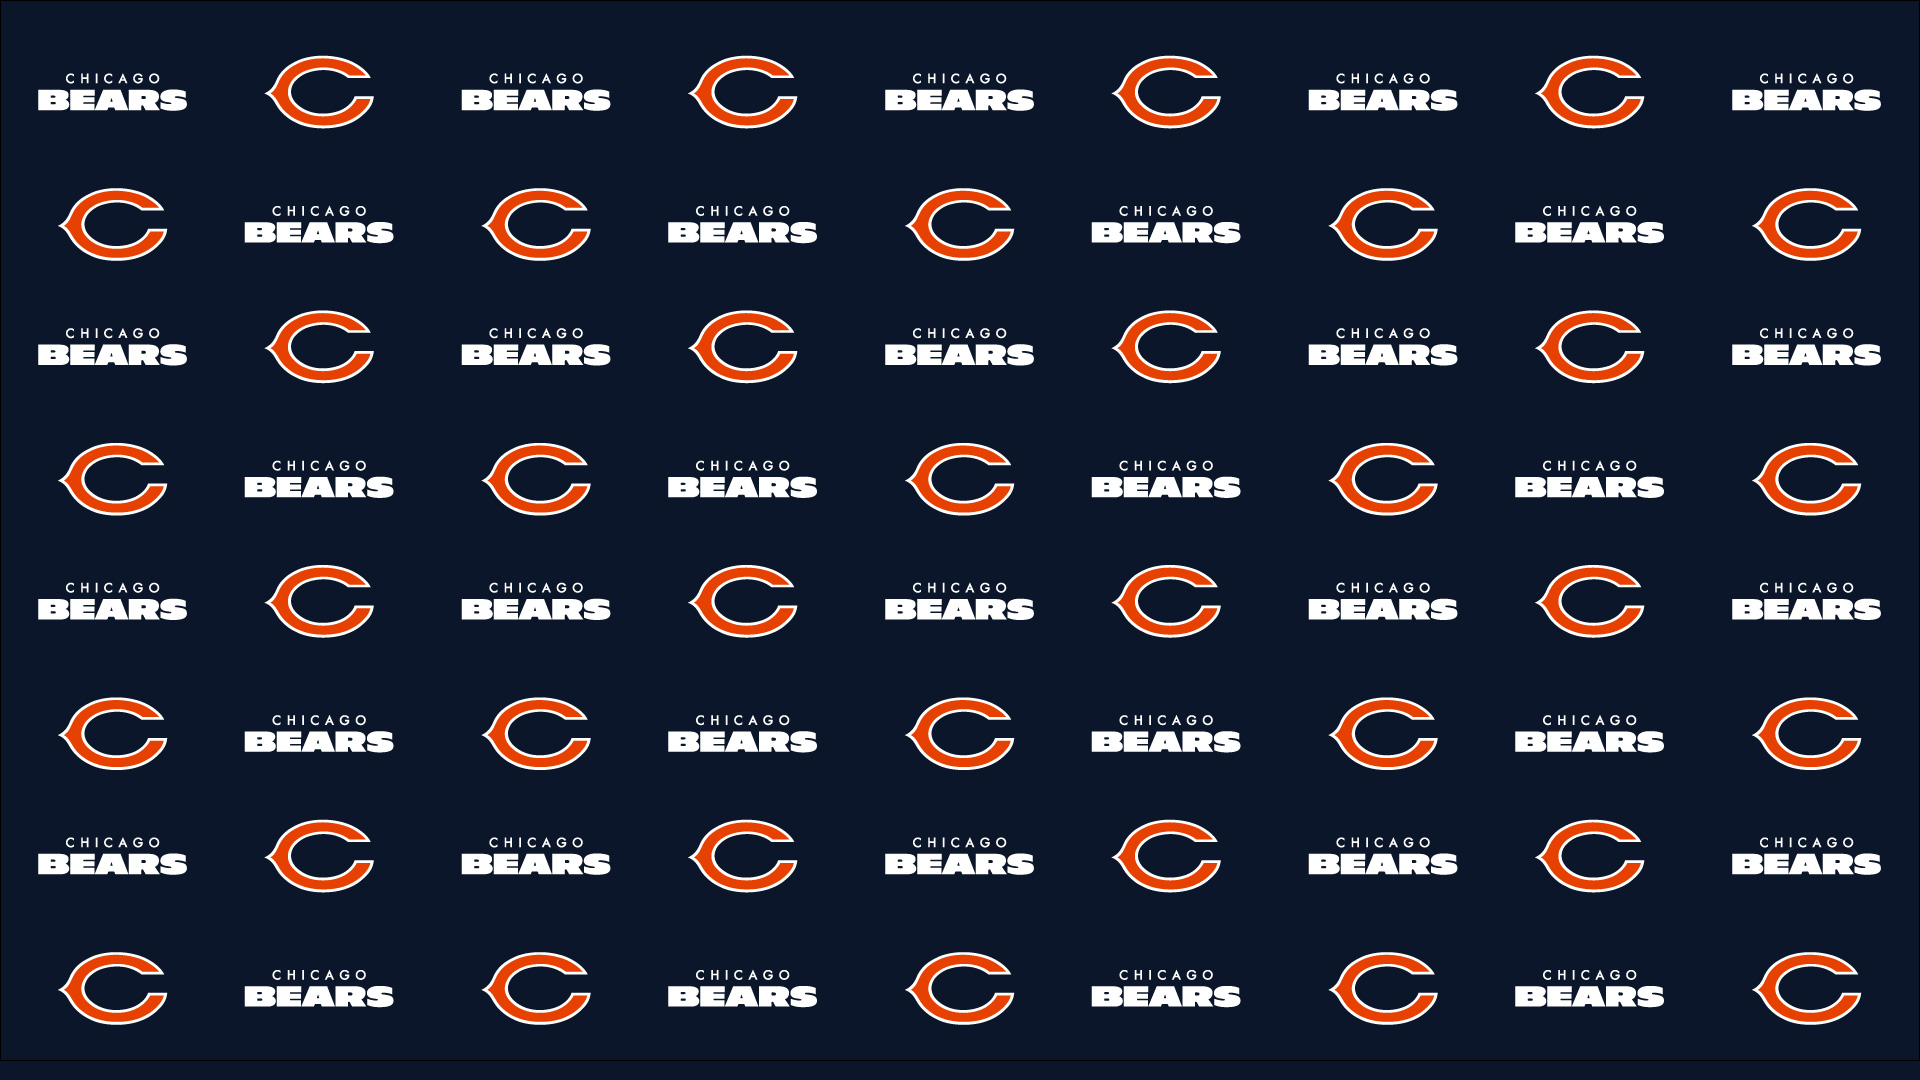 Video Conference Backgrounds | Chicago Bears Official Website